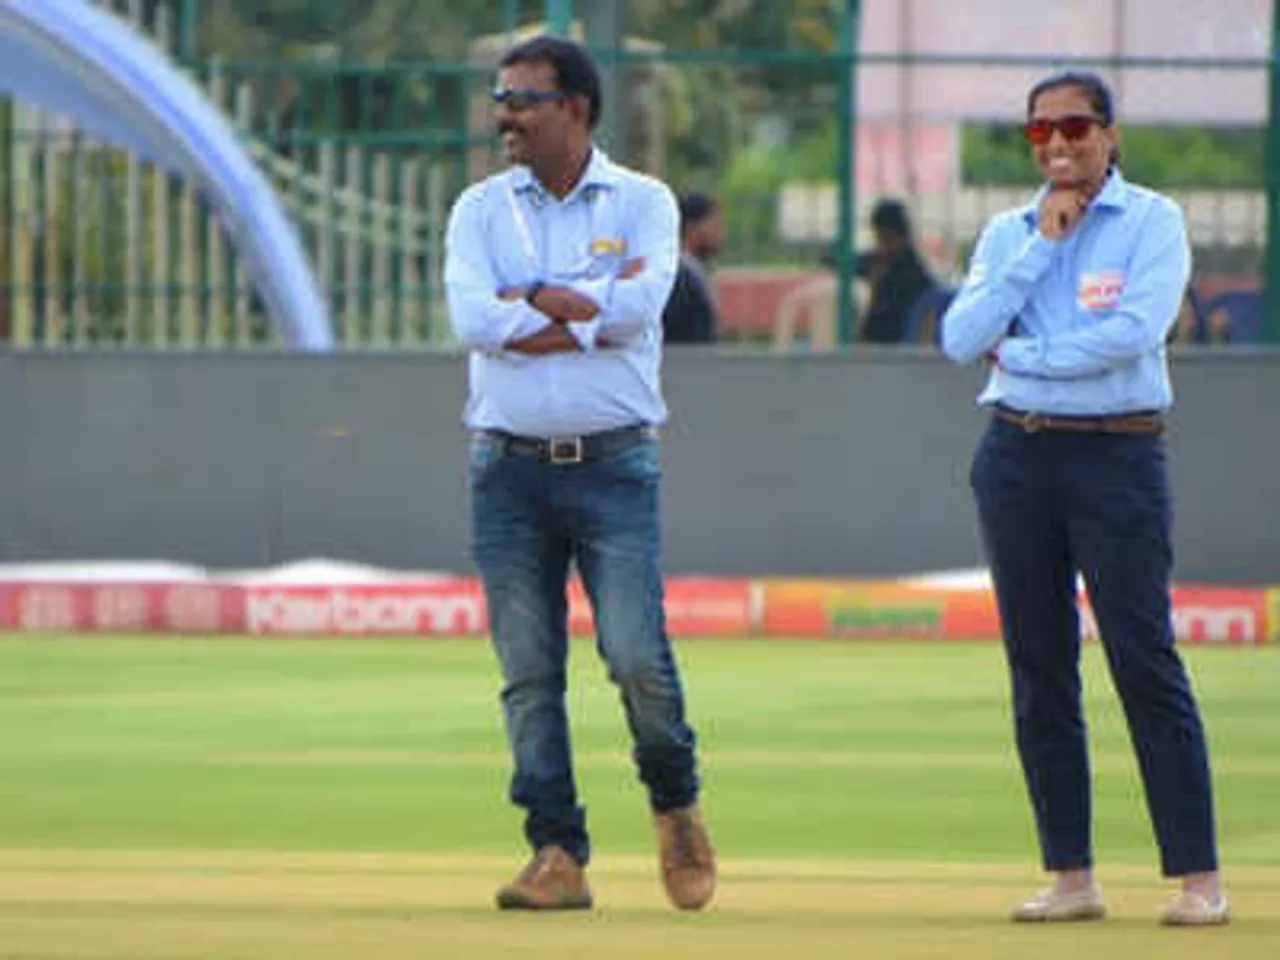 Mihira Chougule becomes the first qualified female match referee from Karnataka